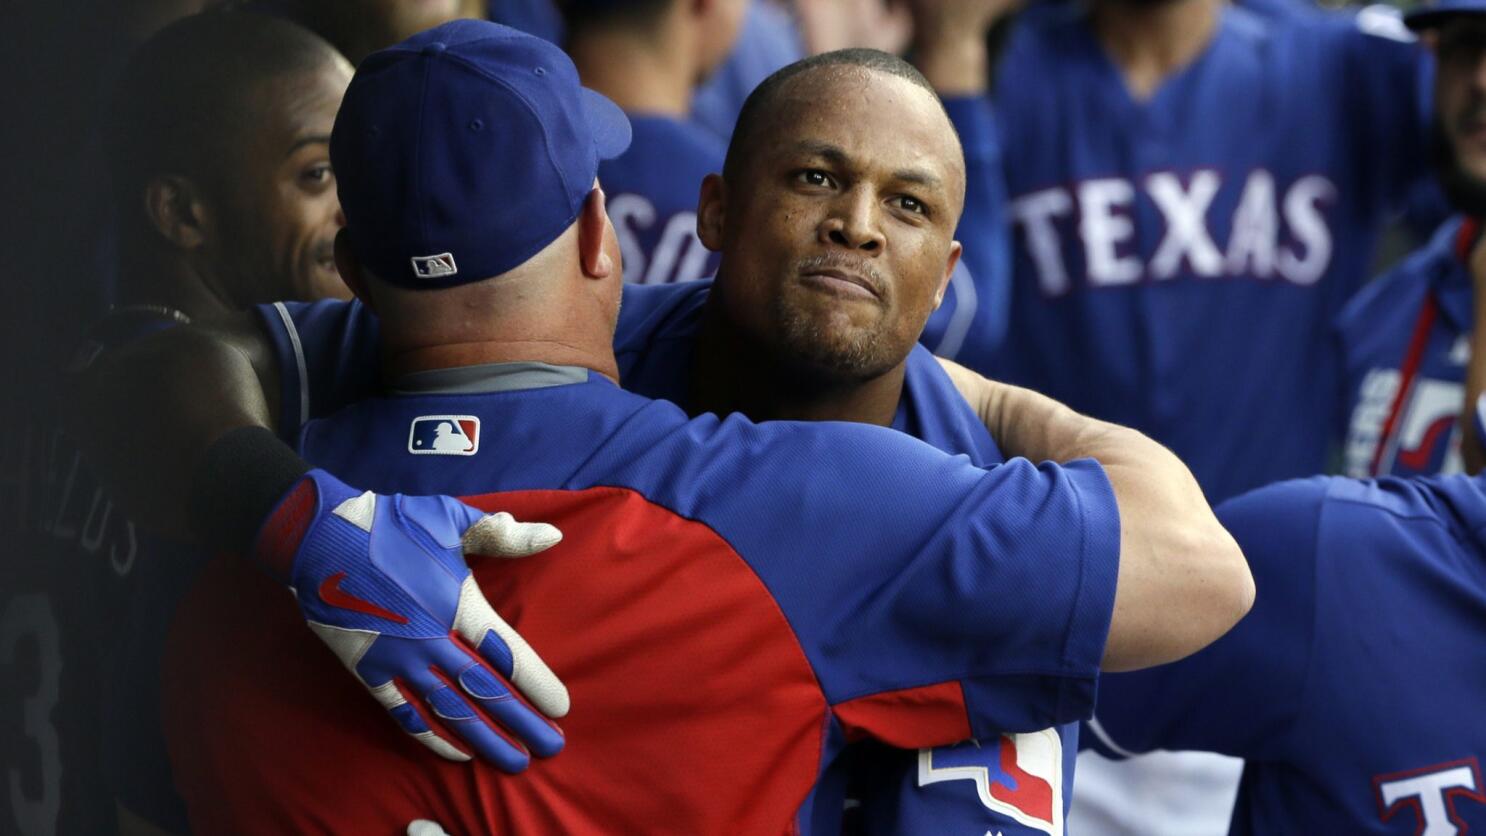 In historic move, two newly-promoted captains with Texas Rangers